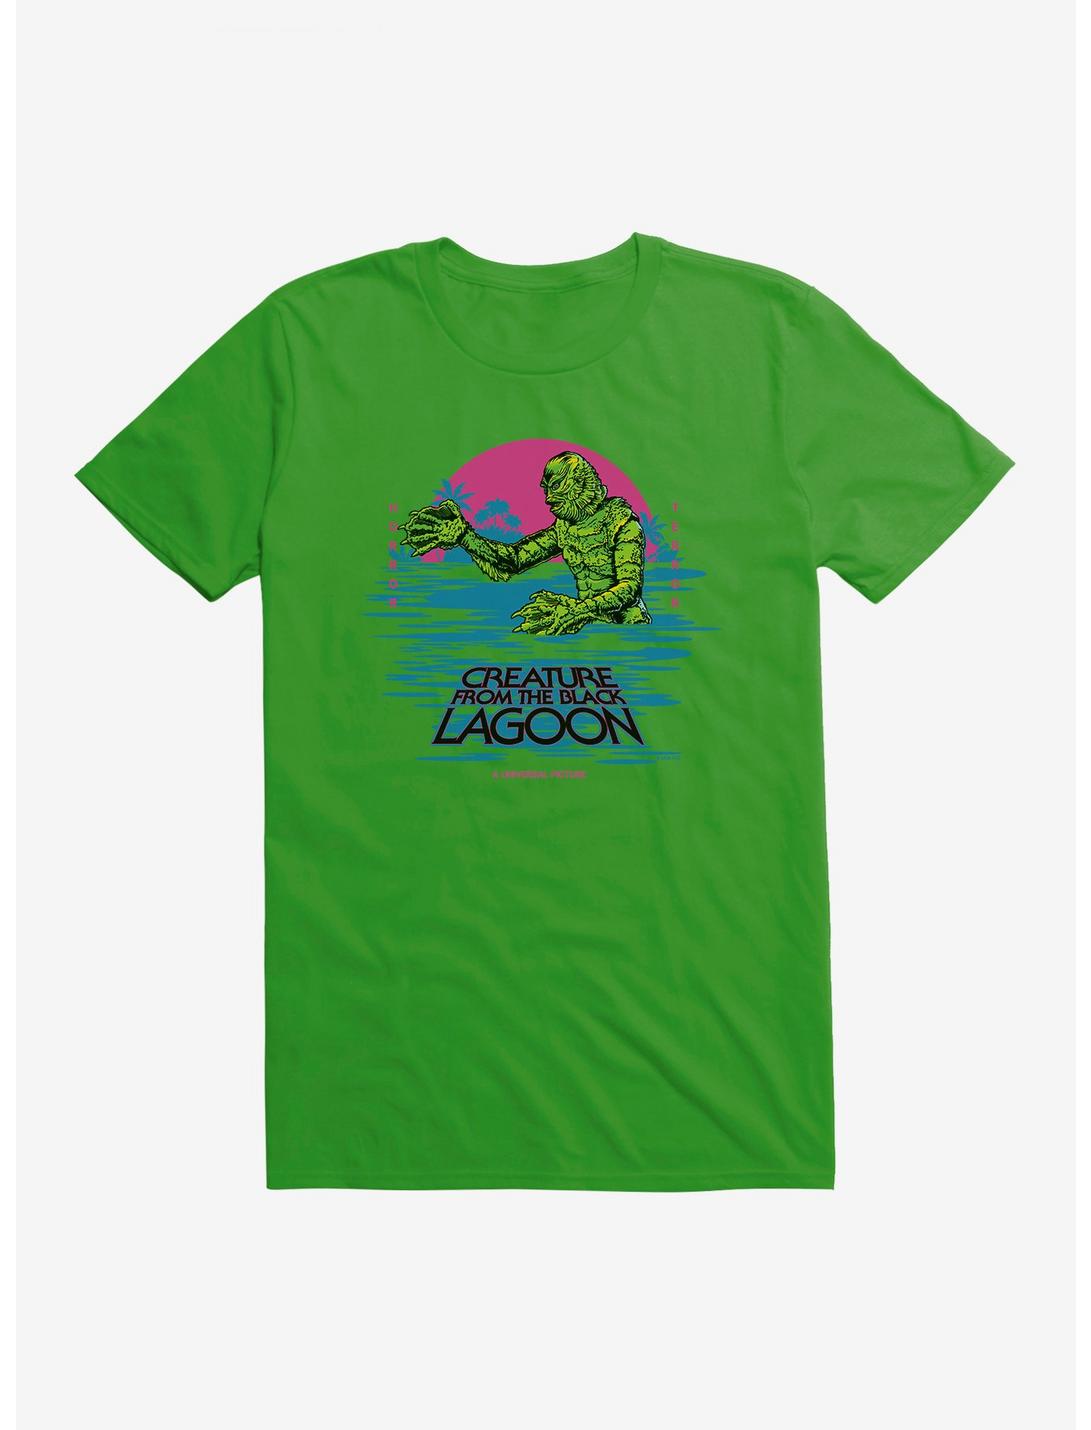 Creature From The Black Lagoon Pastel Title Art T-Shirt, GREEN APPLE, hi-res